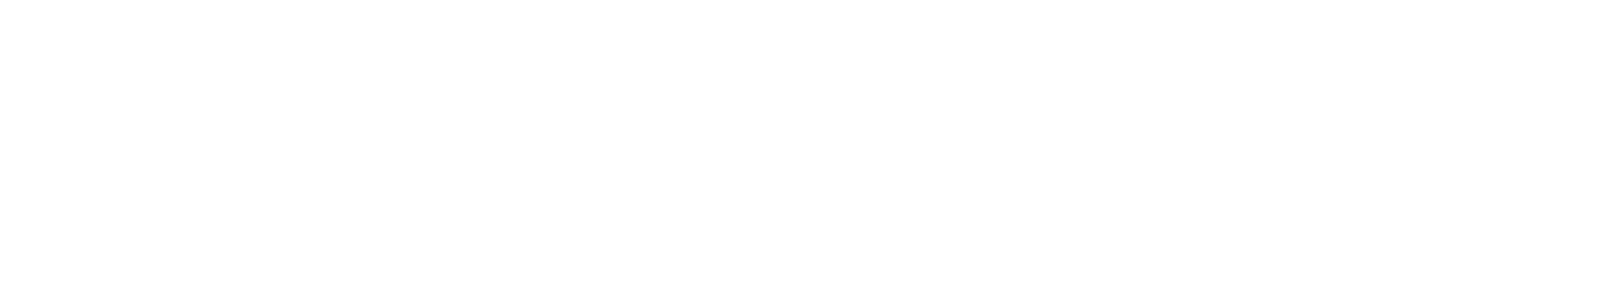 /customers/logos/hightouch.png logo